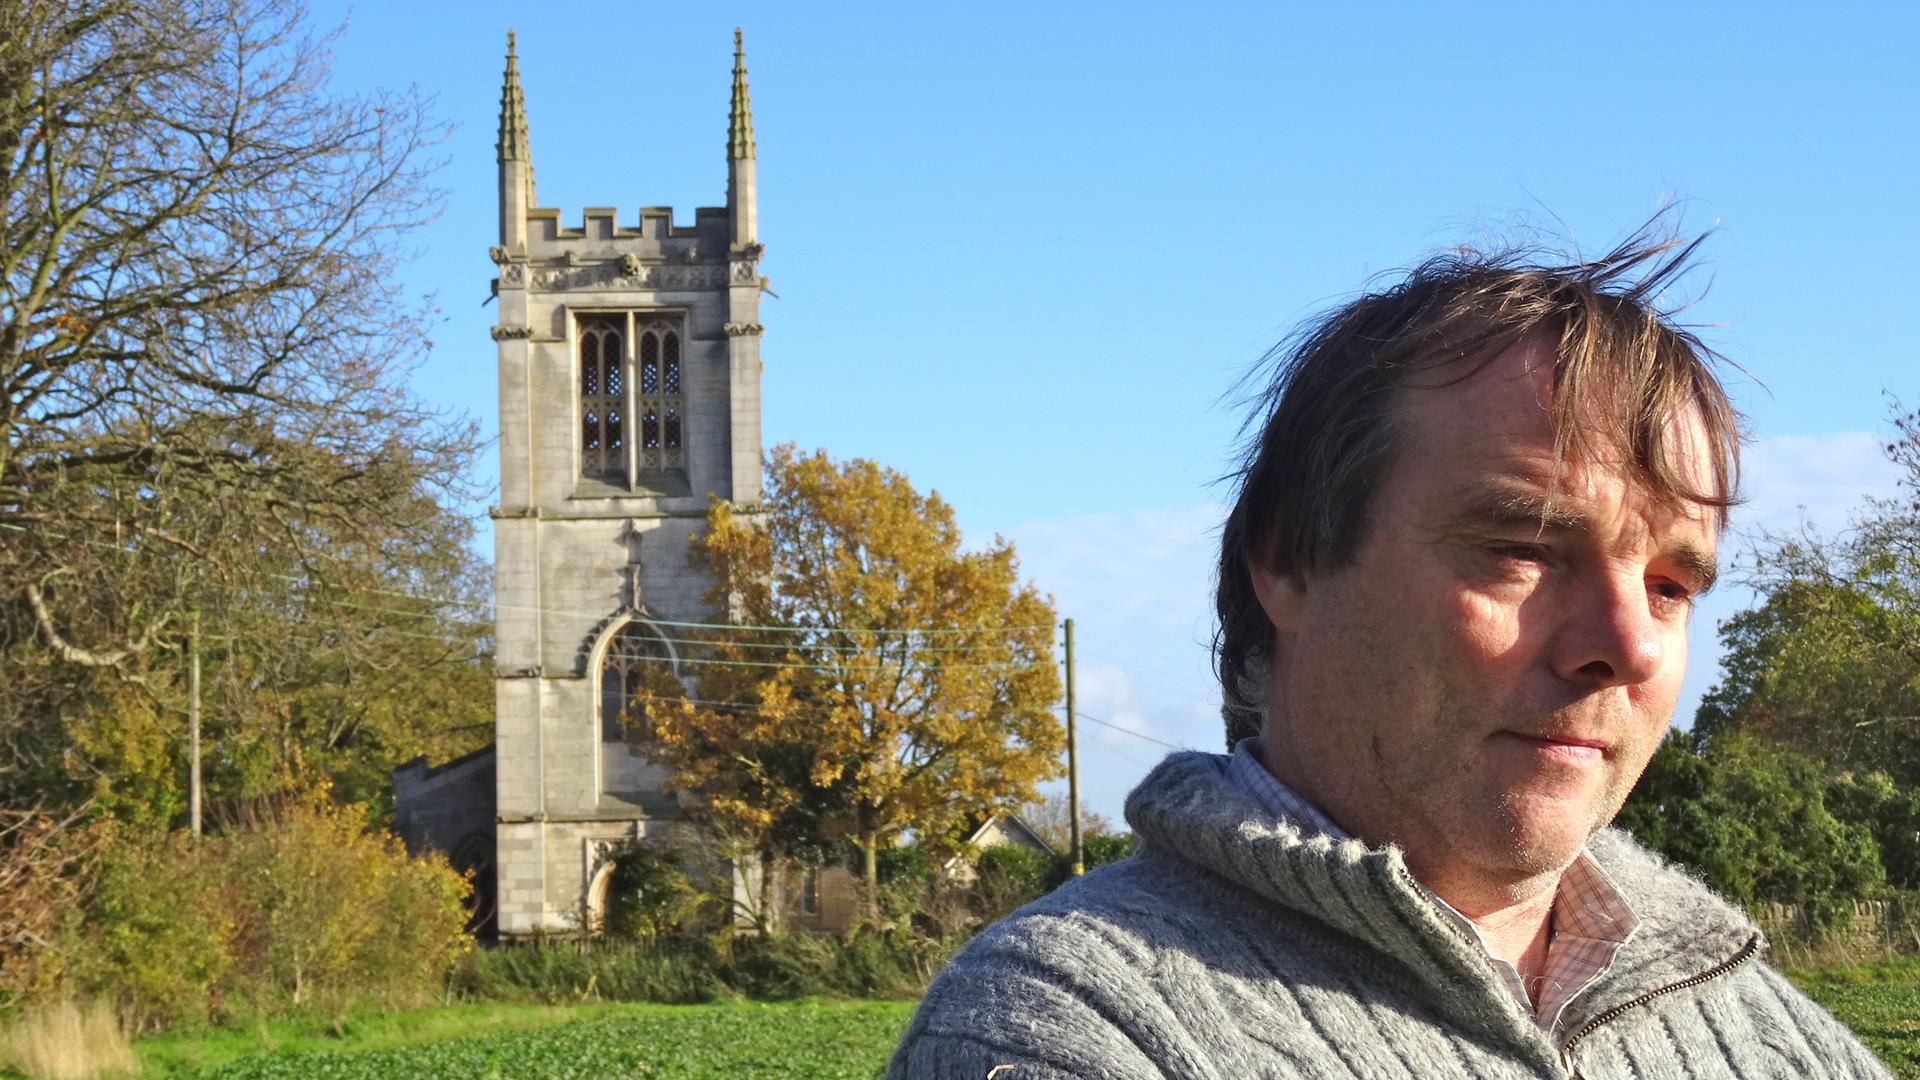 Tim Hankins helps maintain All Saints Church in Aldwincle, England. Poet John Dryden was born in Aldwincle and baptized in the church.